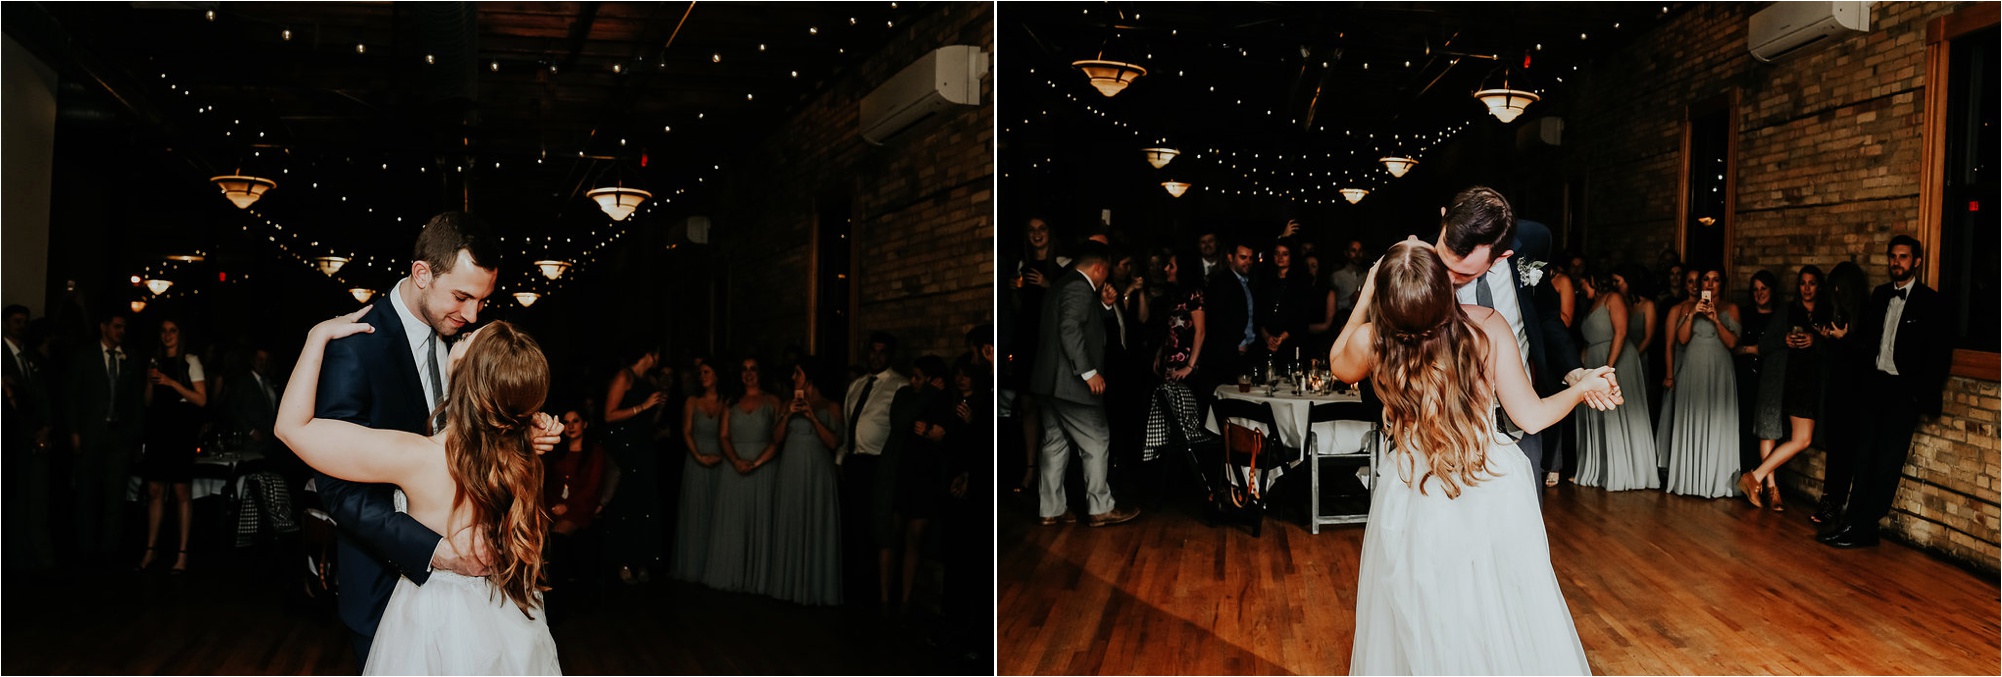 Hewing Hotel and Day Block Event Center Minneapolis Wedding Photographer_3003.jpg